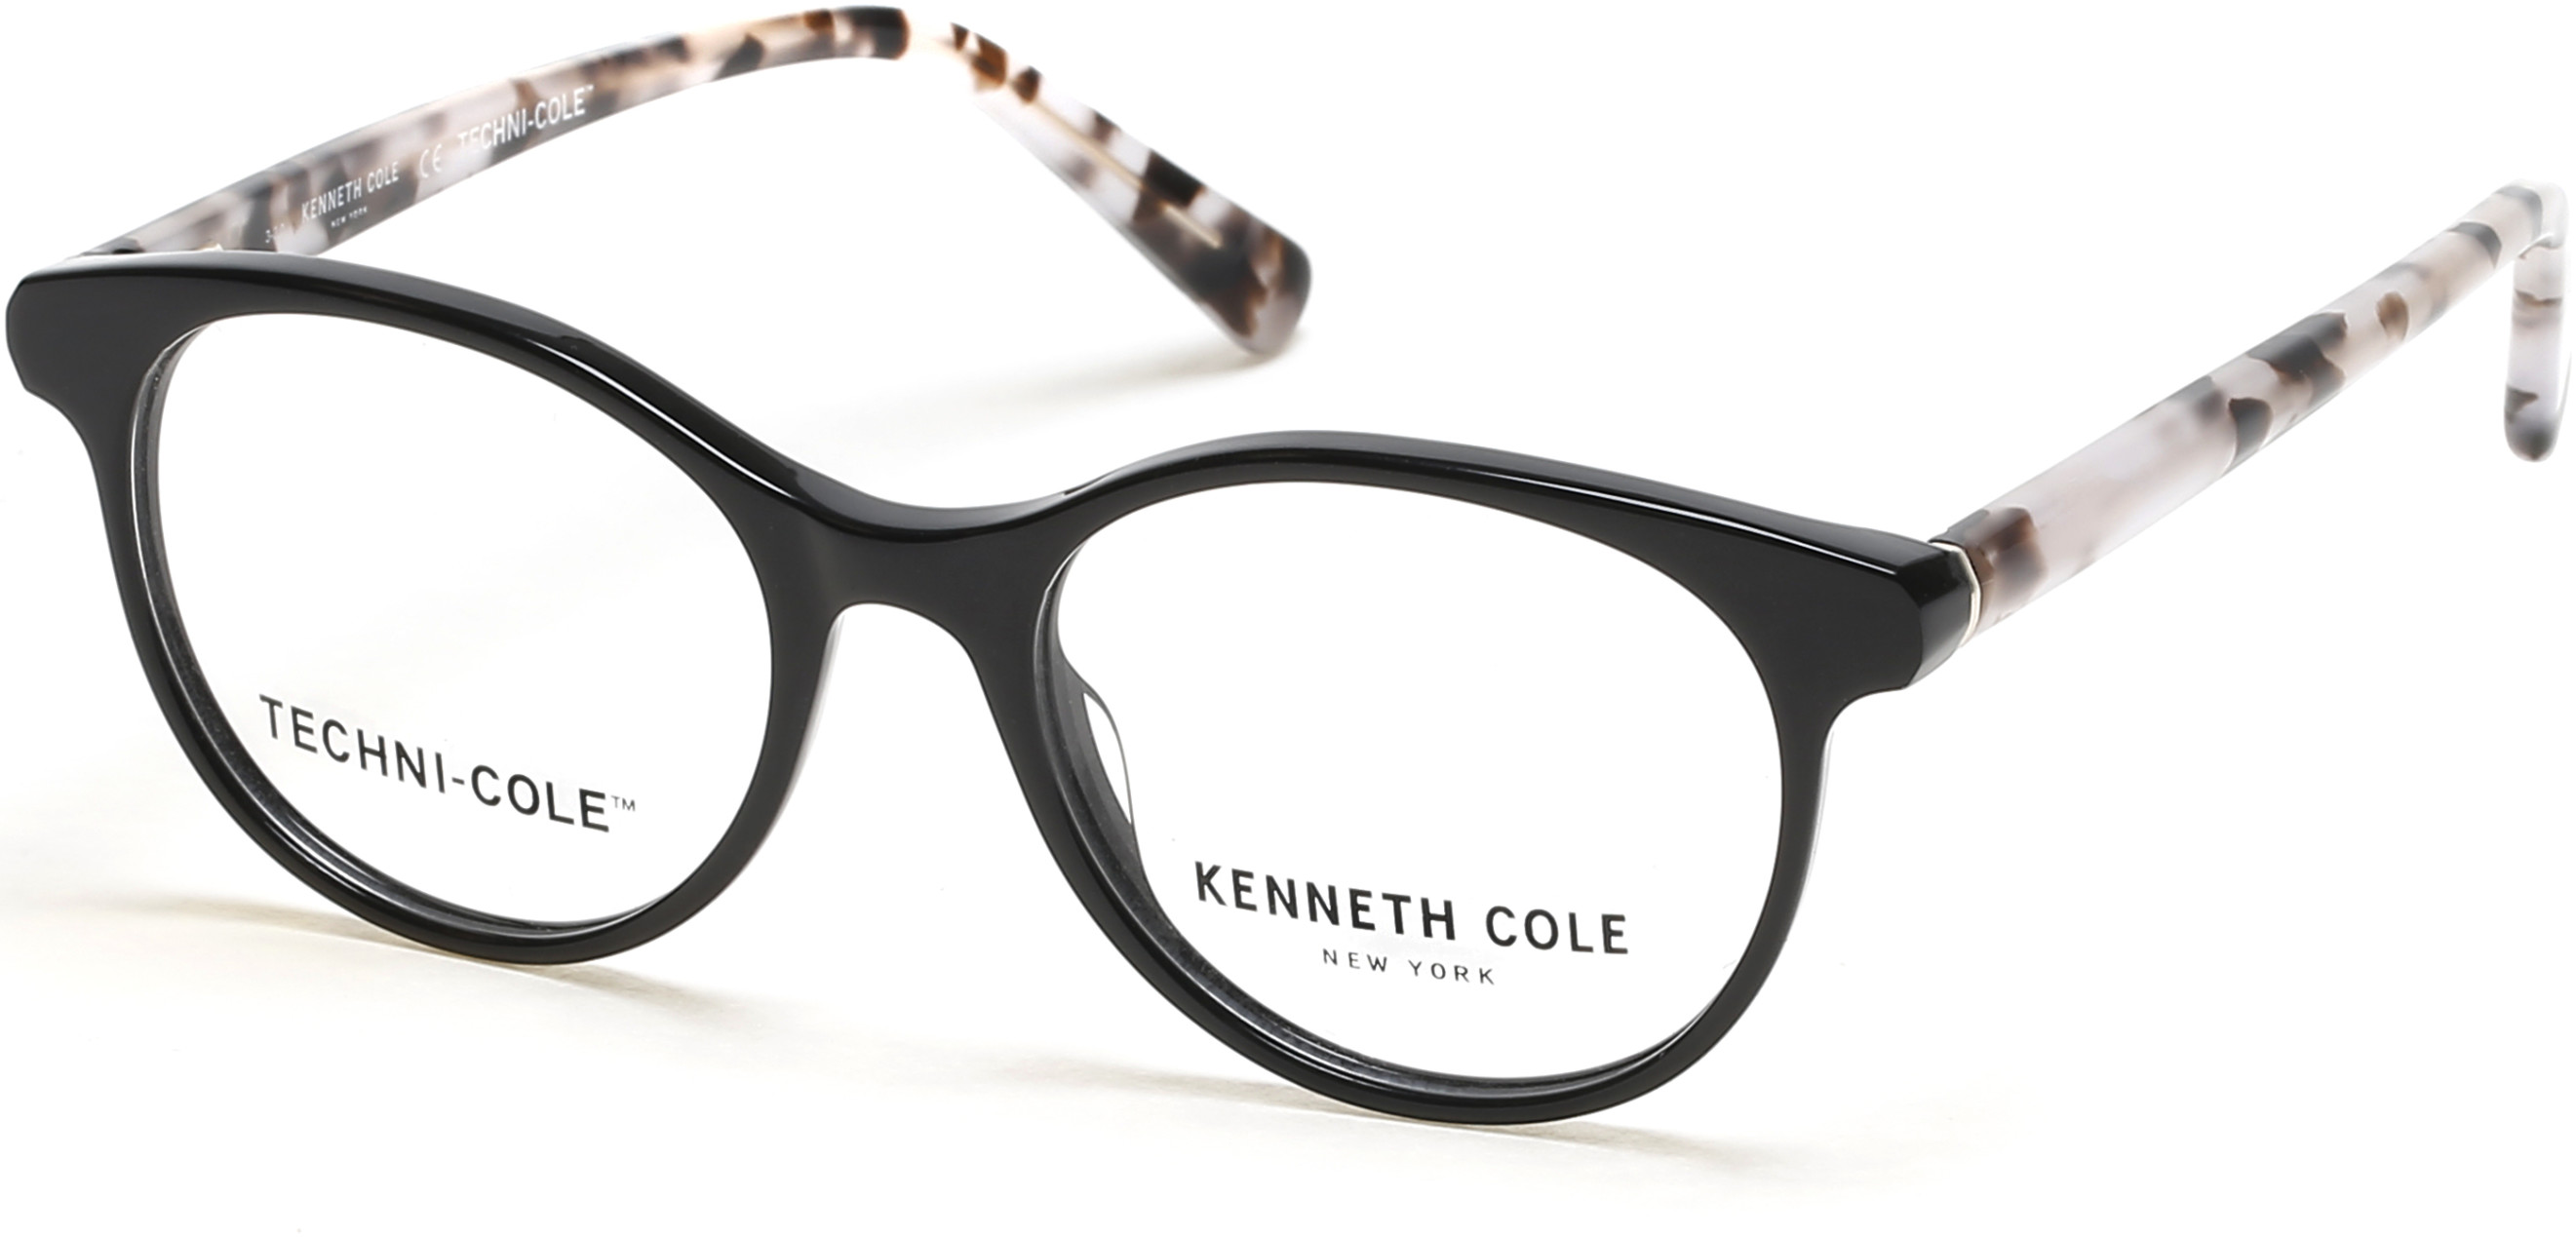 KENNETH COLE NY 0325 001